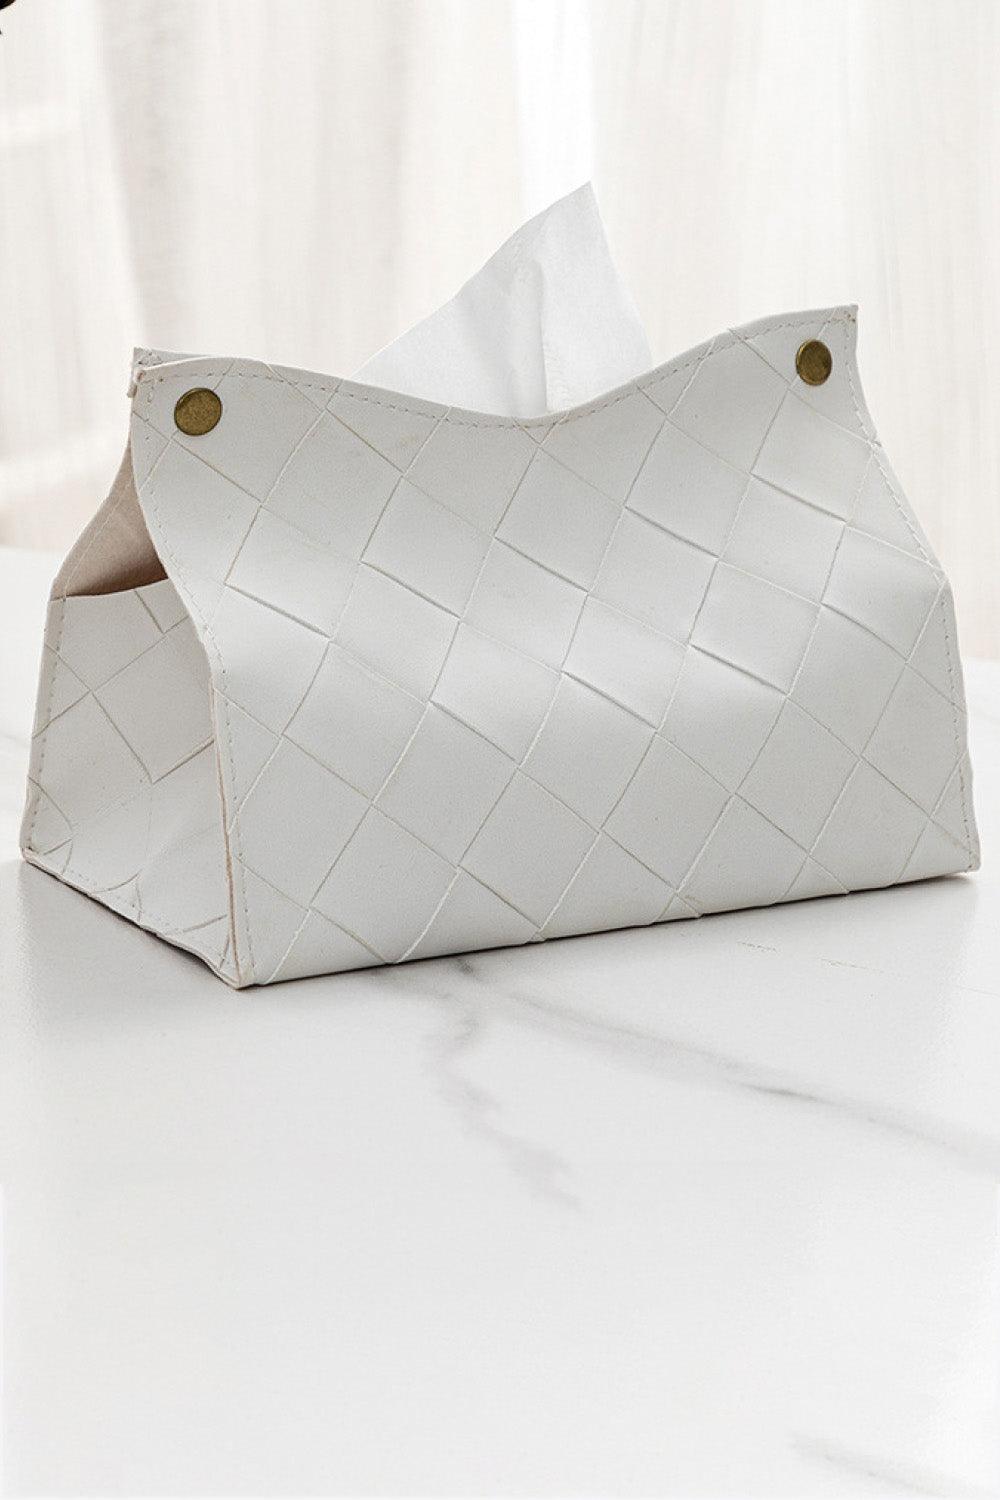 2-Pack Woven Tissue Box Covers - Olive Ave